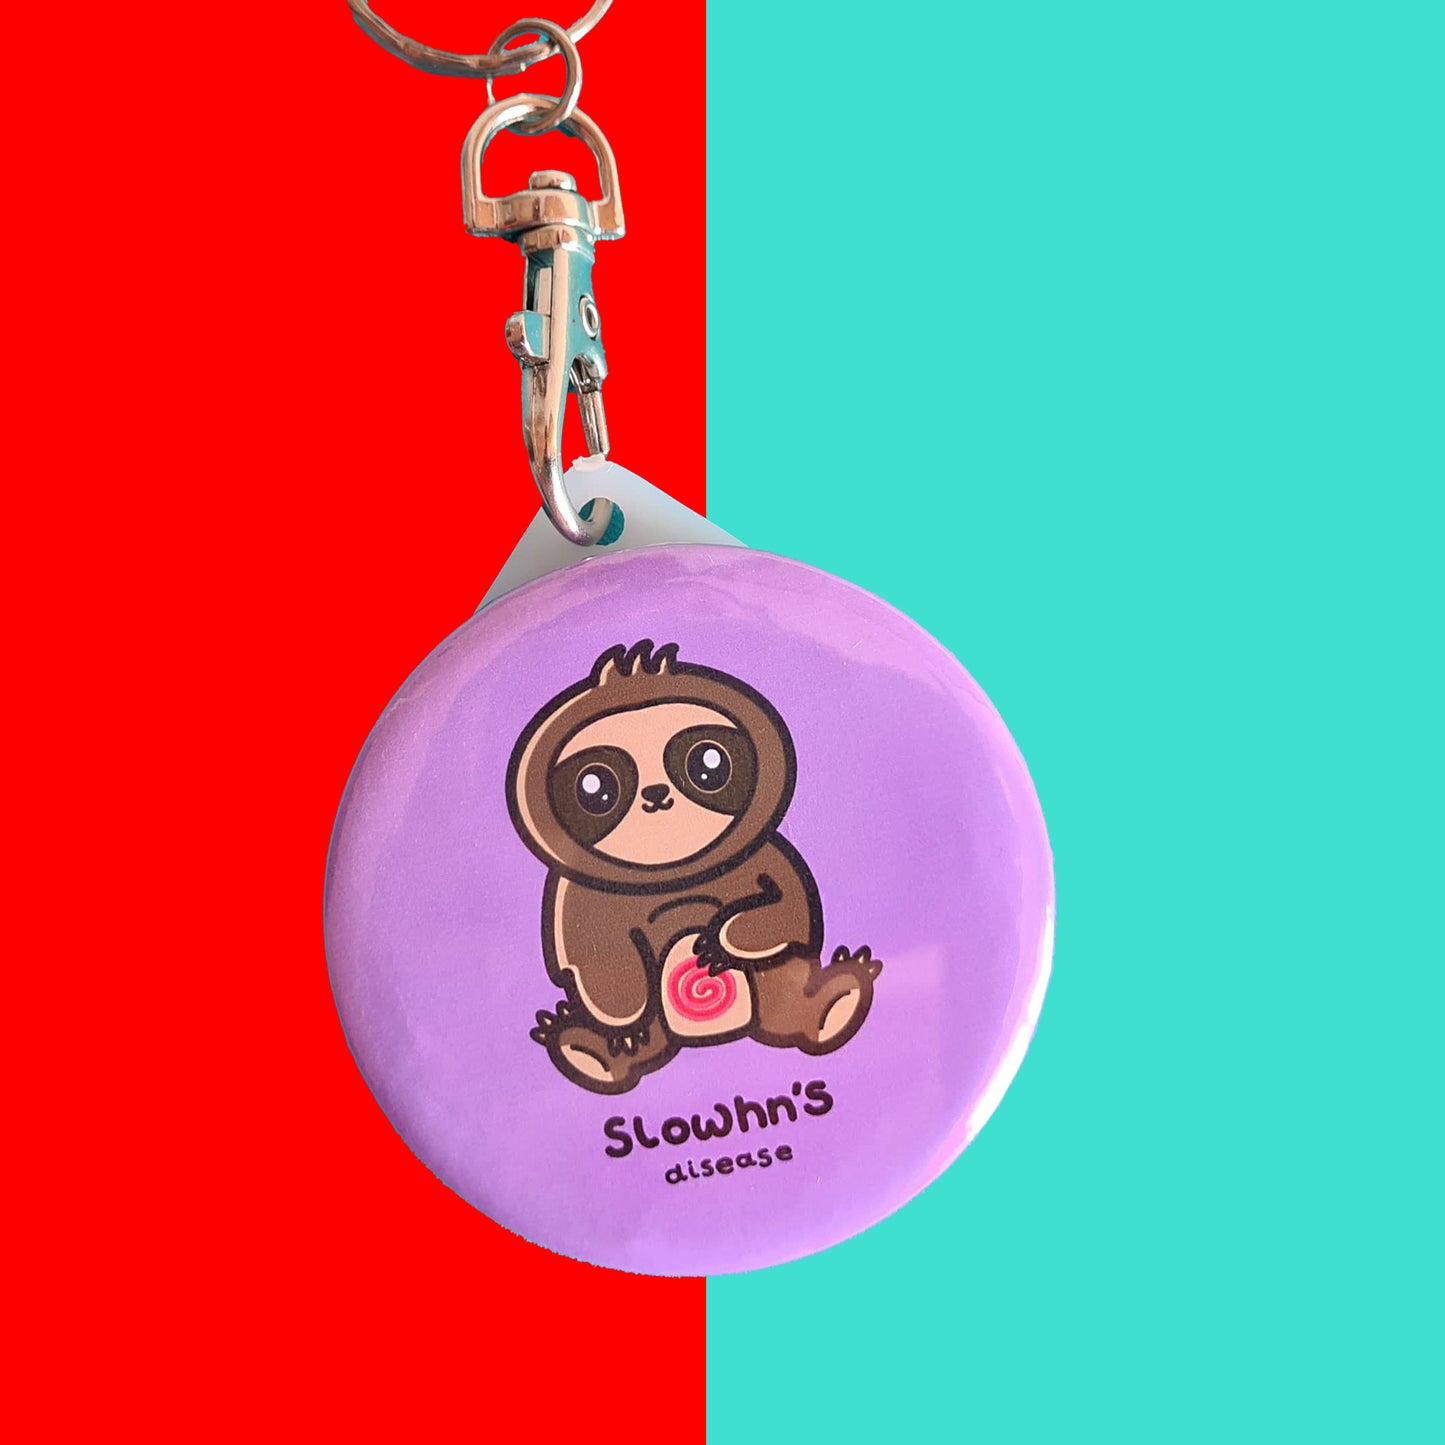 The Slowhn's Disease Sloth Keyring - Crohn's Disease on a red and blue background. The silver lobster clip pink plastic circular keyring of a smiling sat down brown sloth clutching its swirly red tummy and black text underneath reading 'slowhn's disease'. The hand made design is raising awareness for crohn's disease.